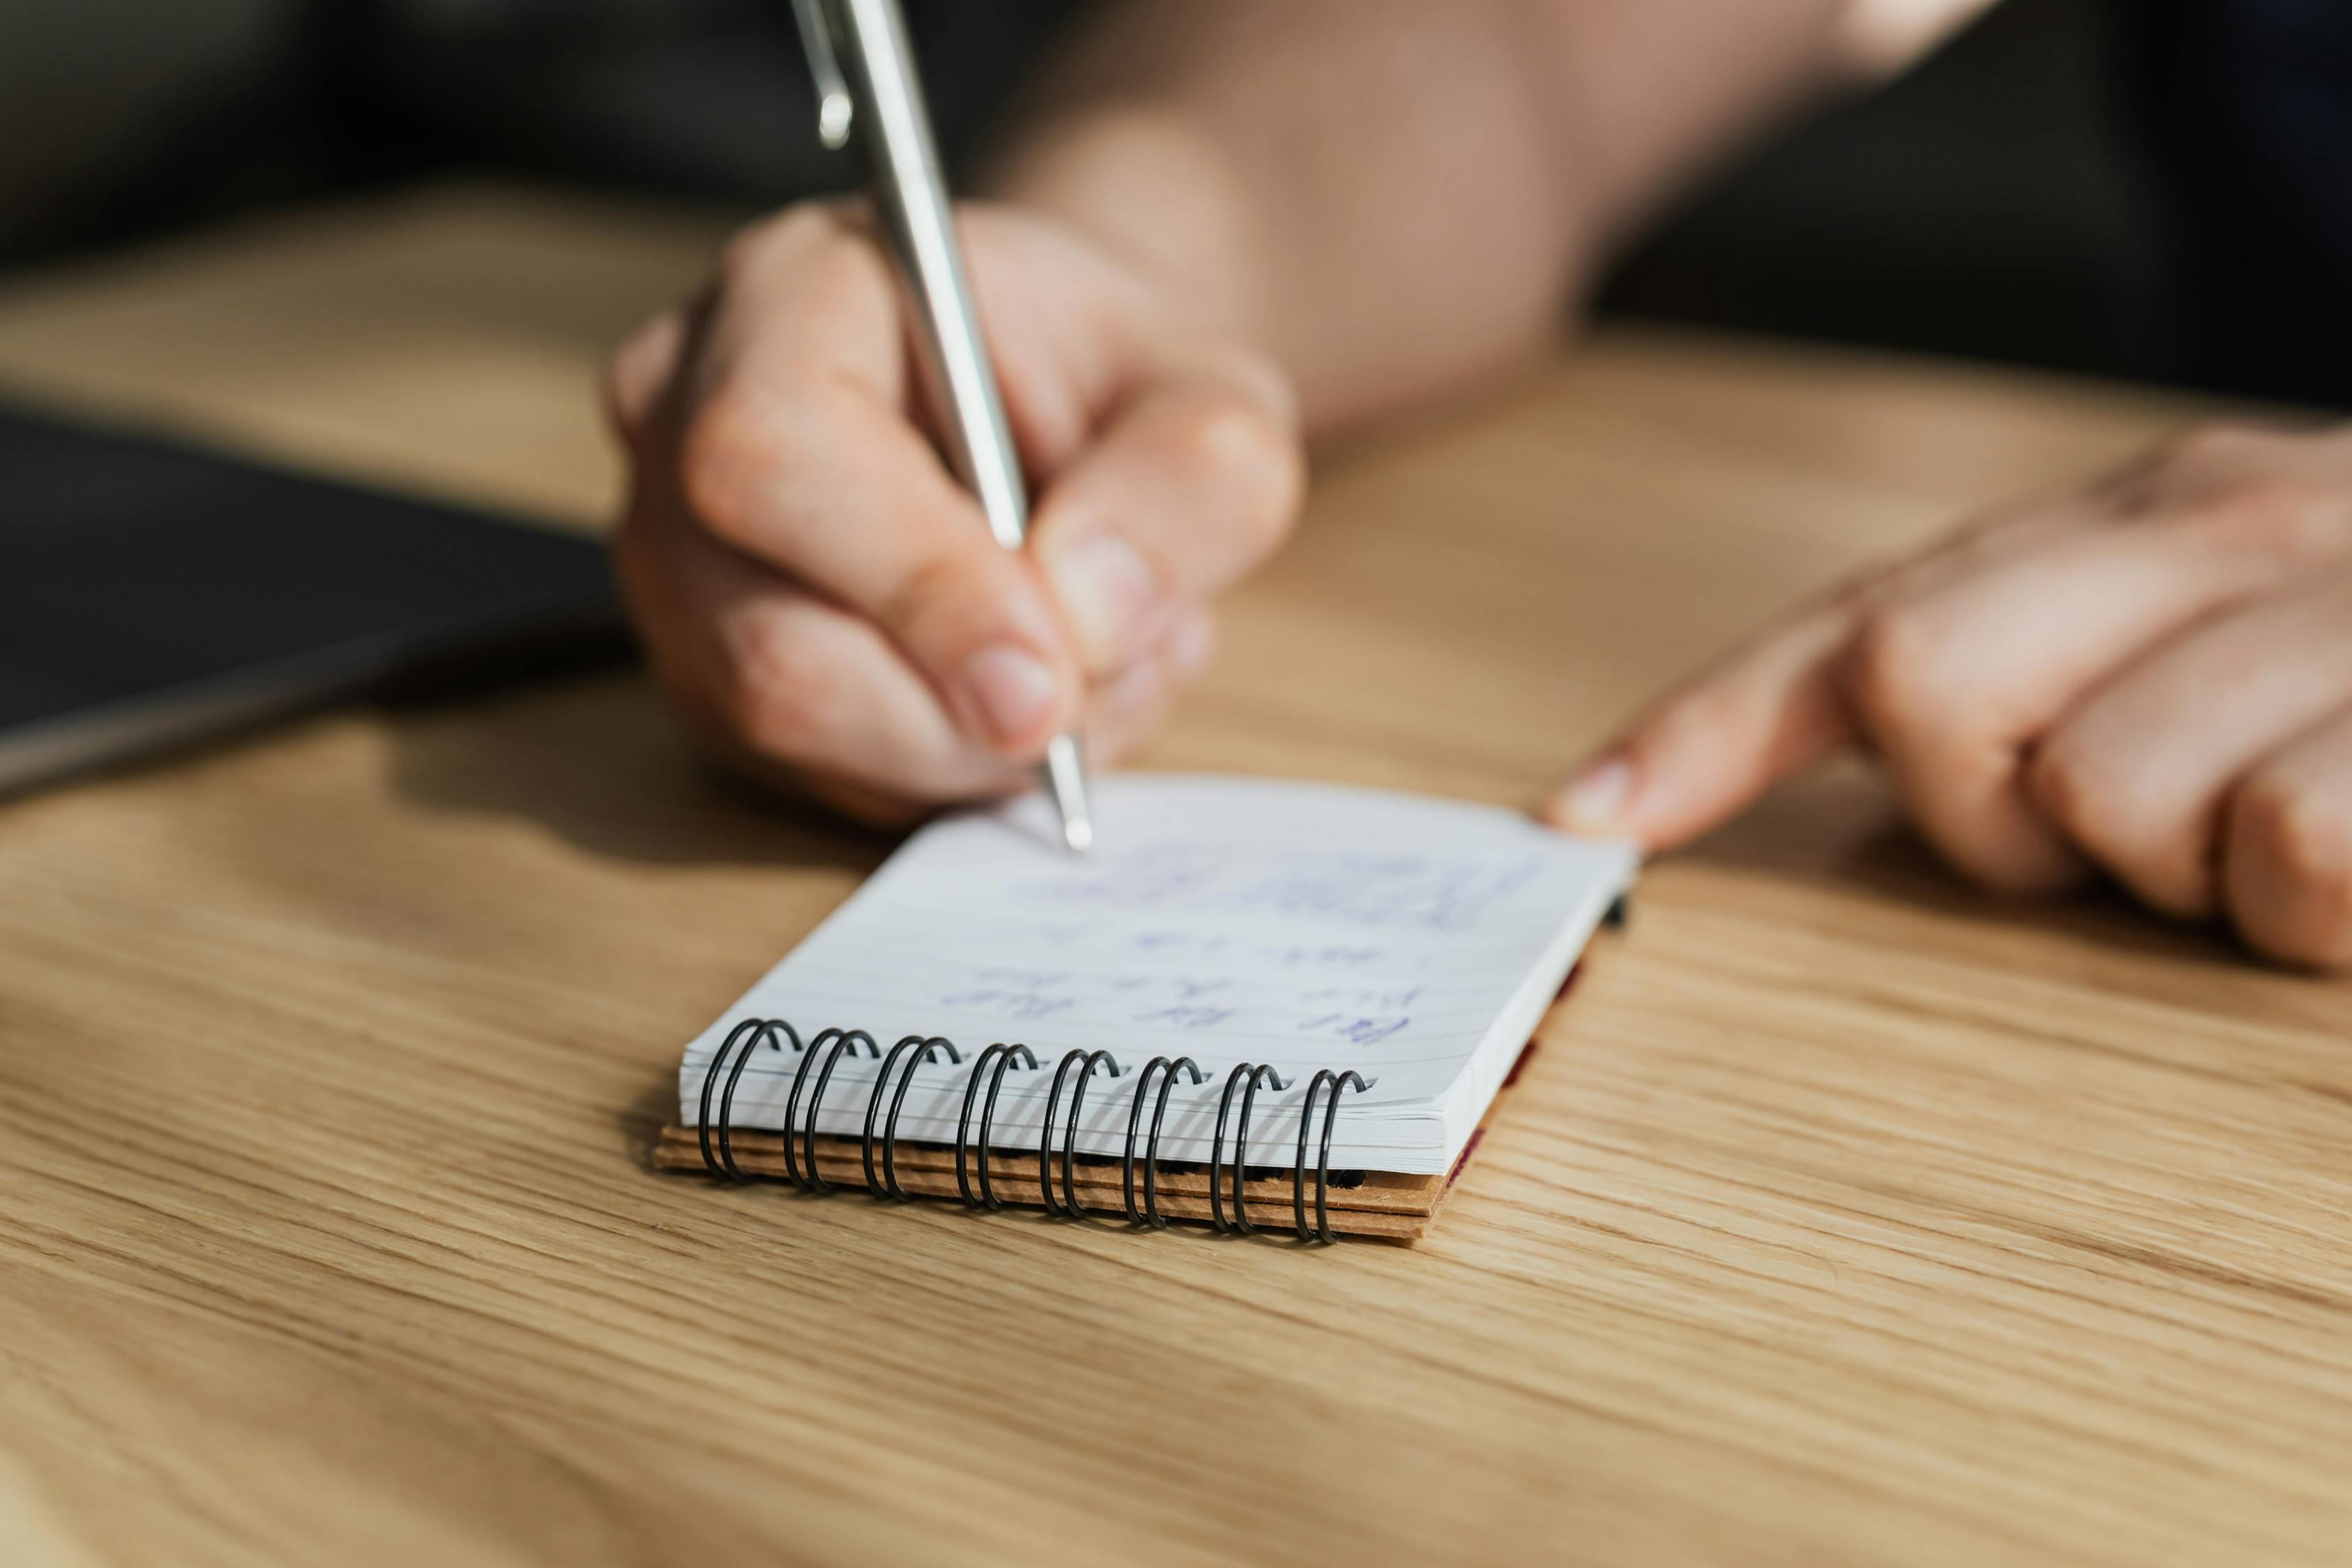  A person is seen taking notes in a spiral notebook while sitting at a wooden table.